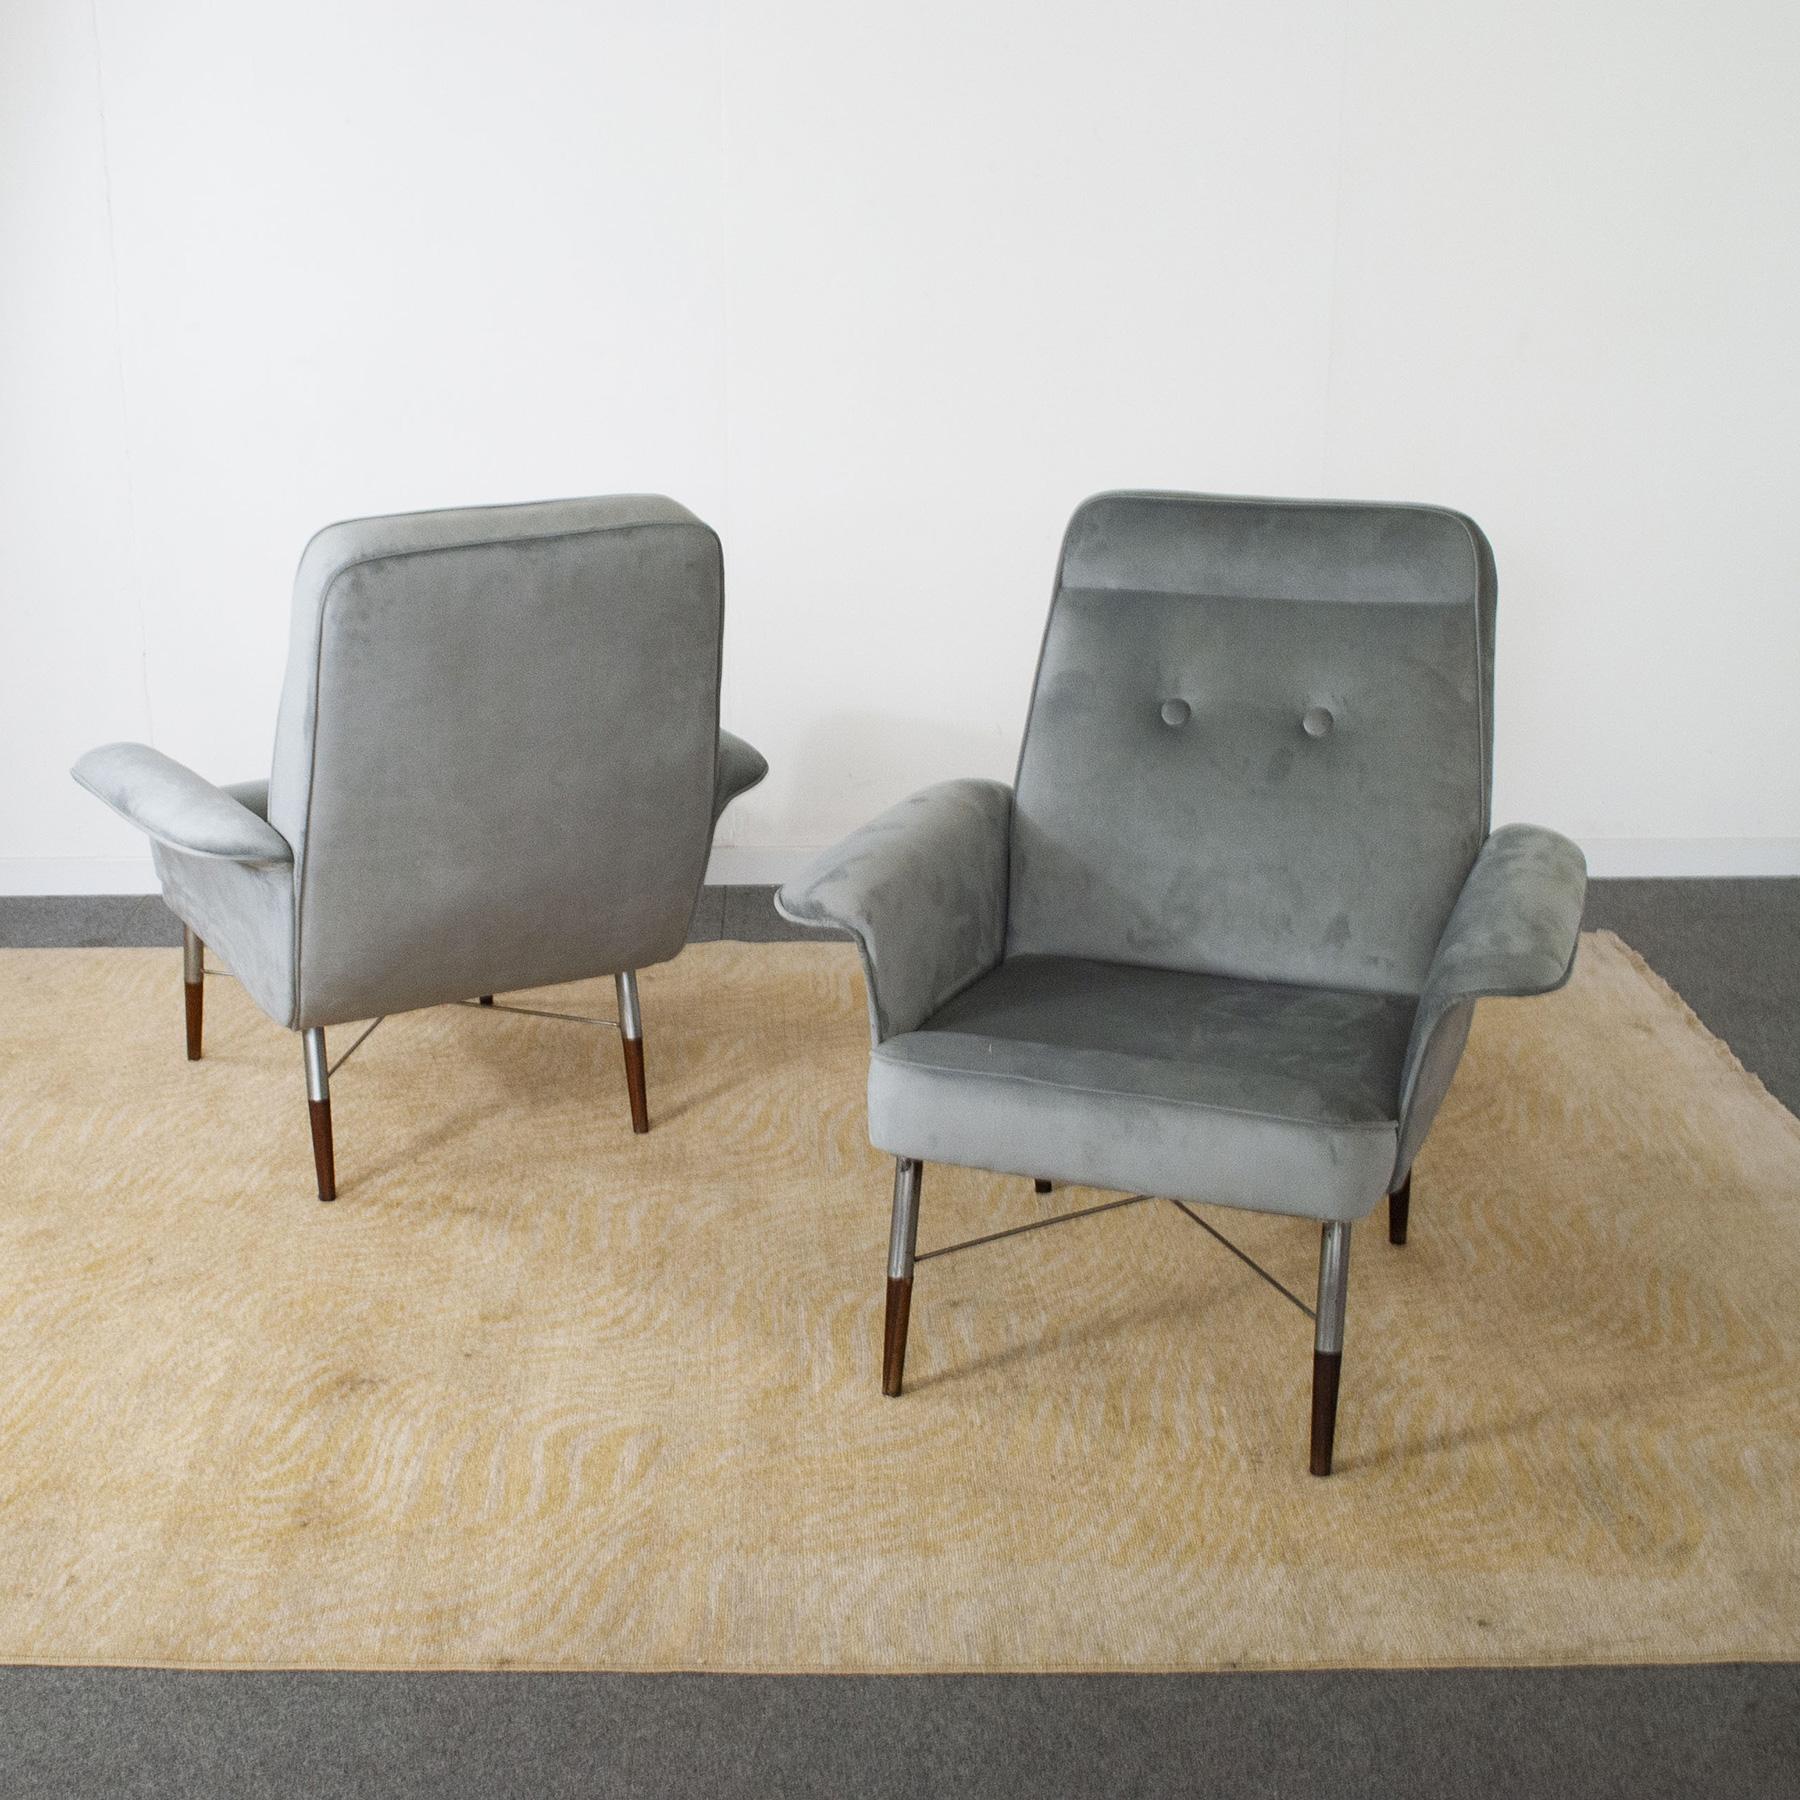 Italian Mid-Century Pair of Armchairs from the Sixties For Sale 3